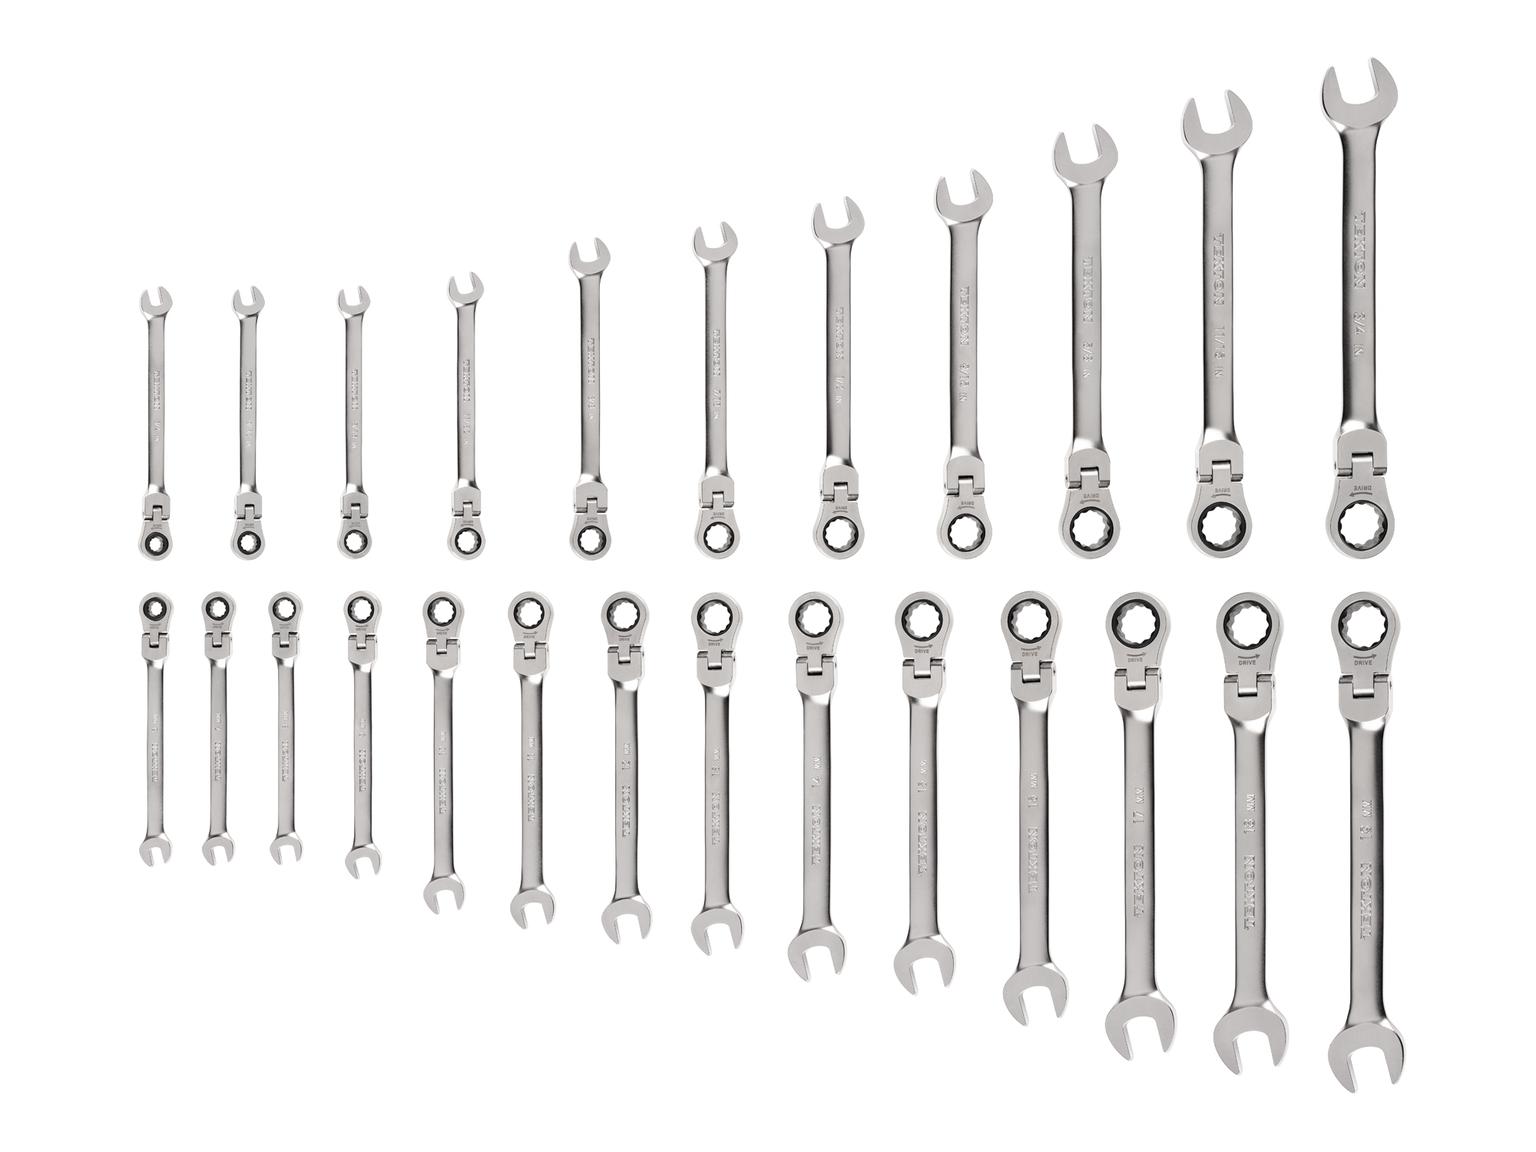 TEKTON WRC95004-T Flex Head 12-Point Ratcheting Combination Wrench Set, 25-Piece (1/4-3/4 in., 6-19 mm)